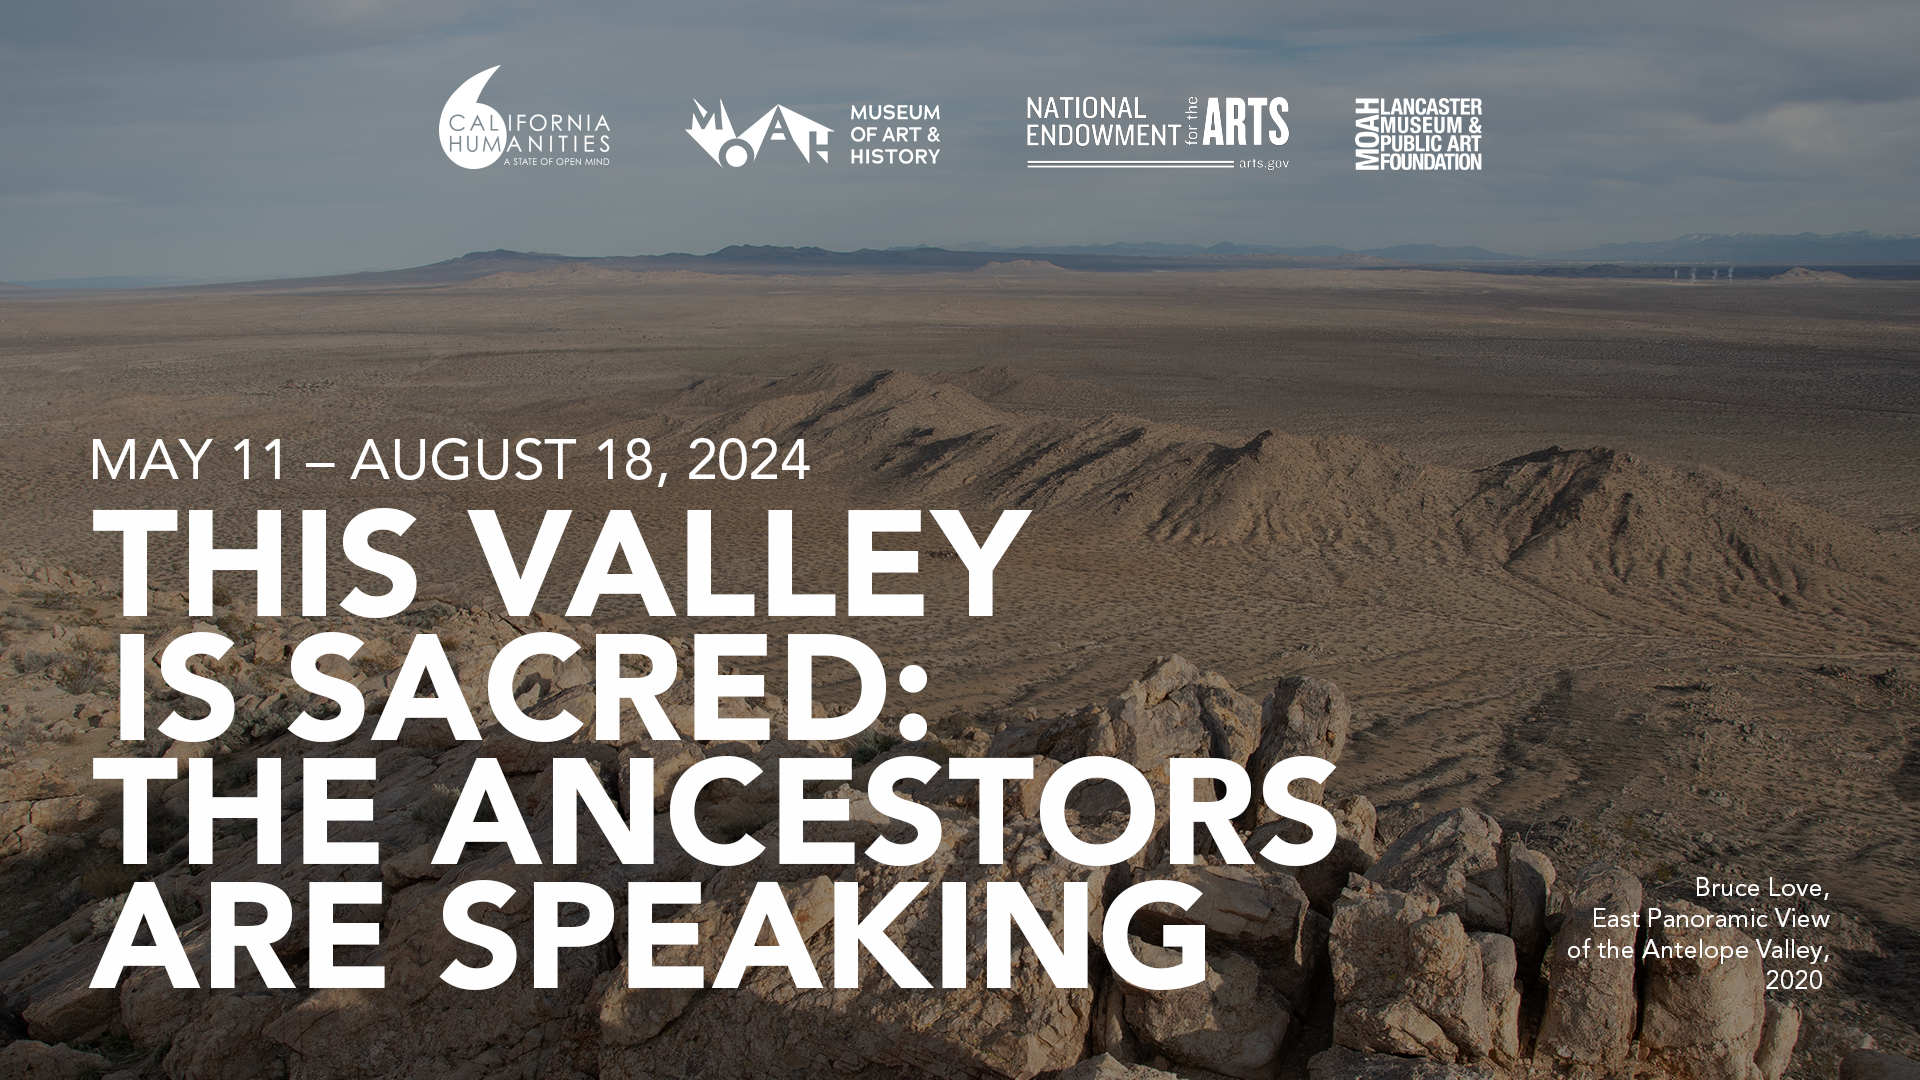 This Valley is Sacred: The Ancestors are Speaking in all caps, with photo of outstretched land in antelope valley behind it.